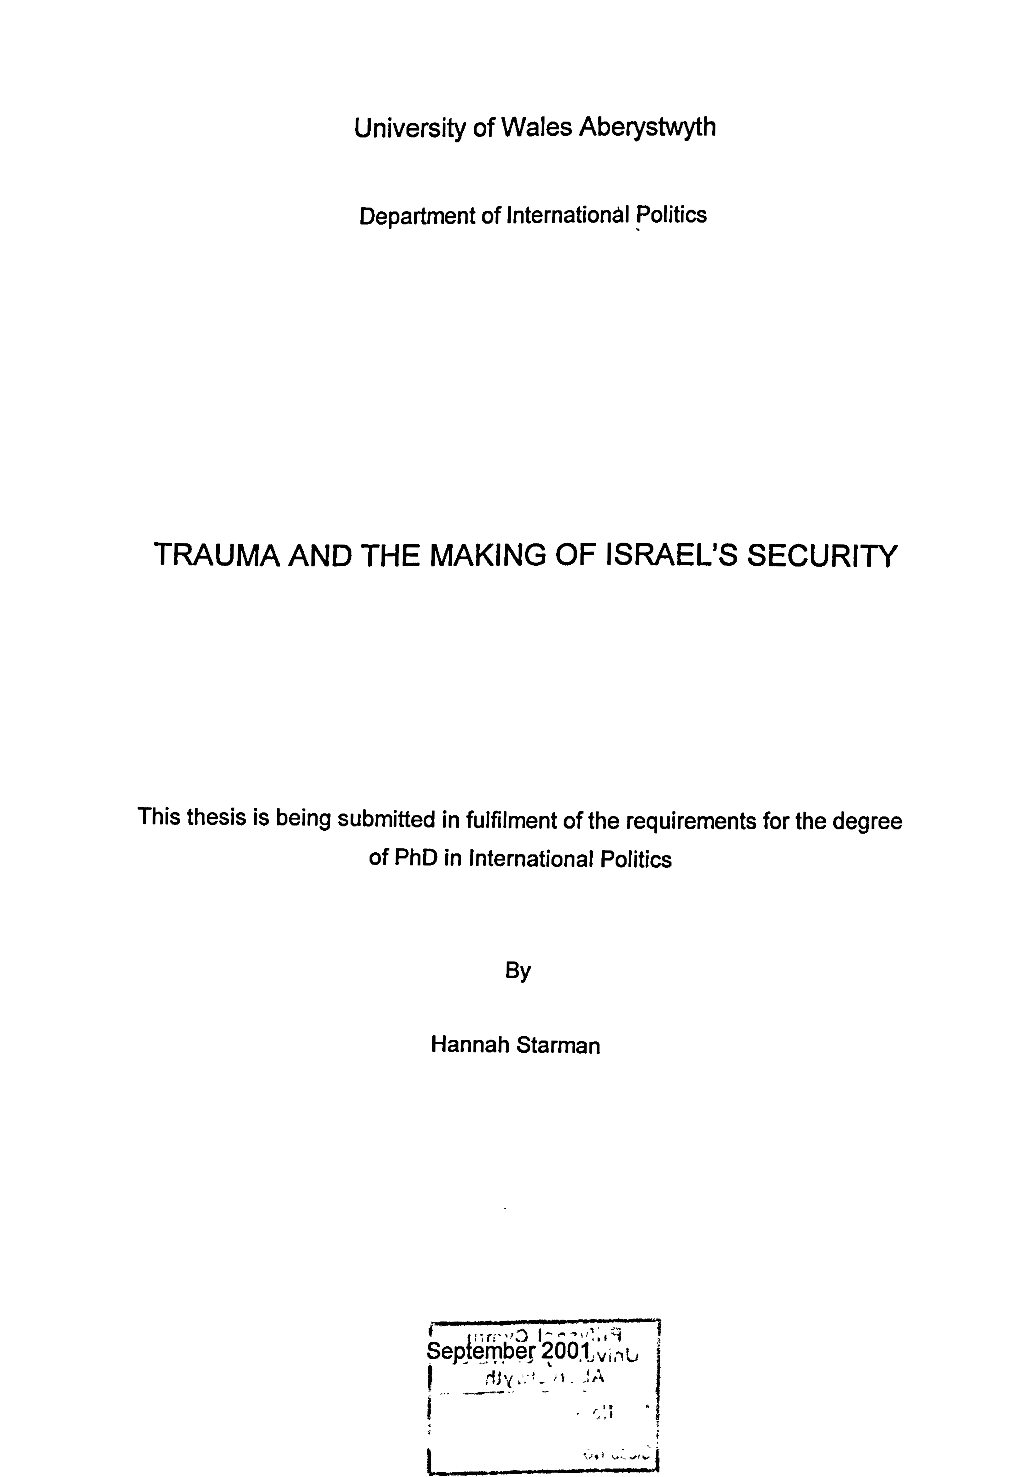 Trauma and the Making of Israel's Security